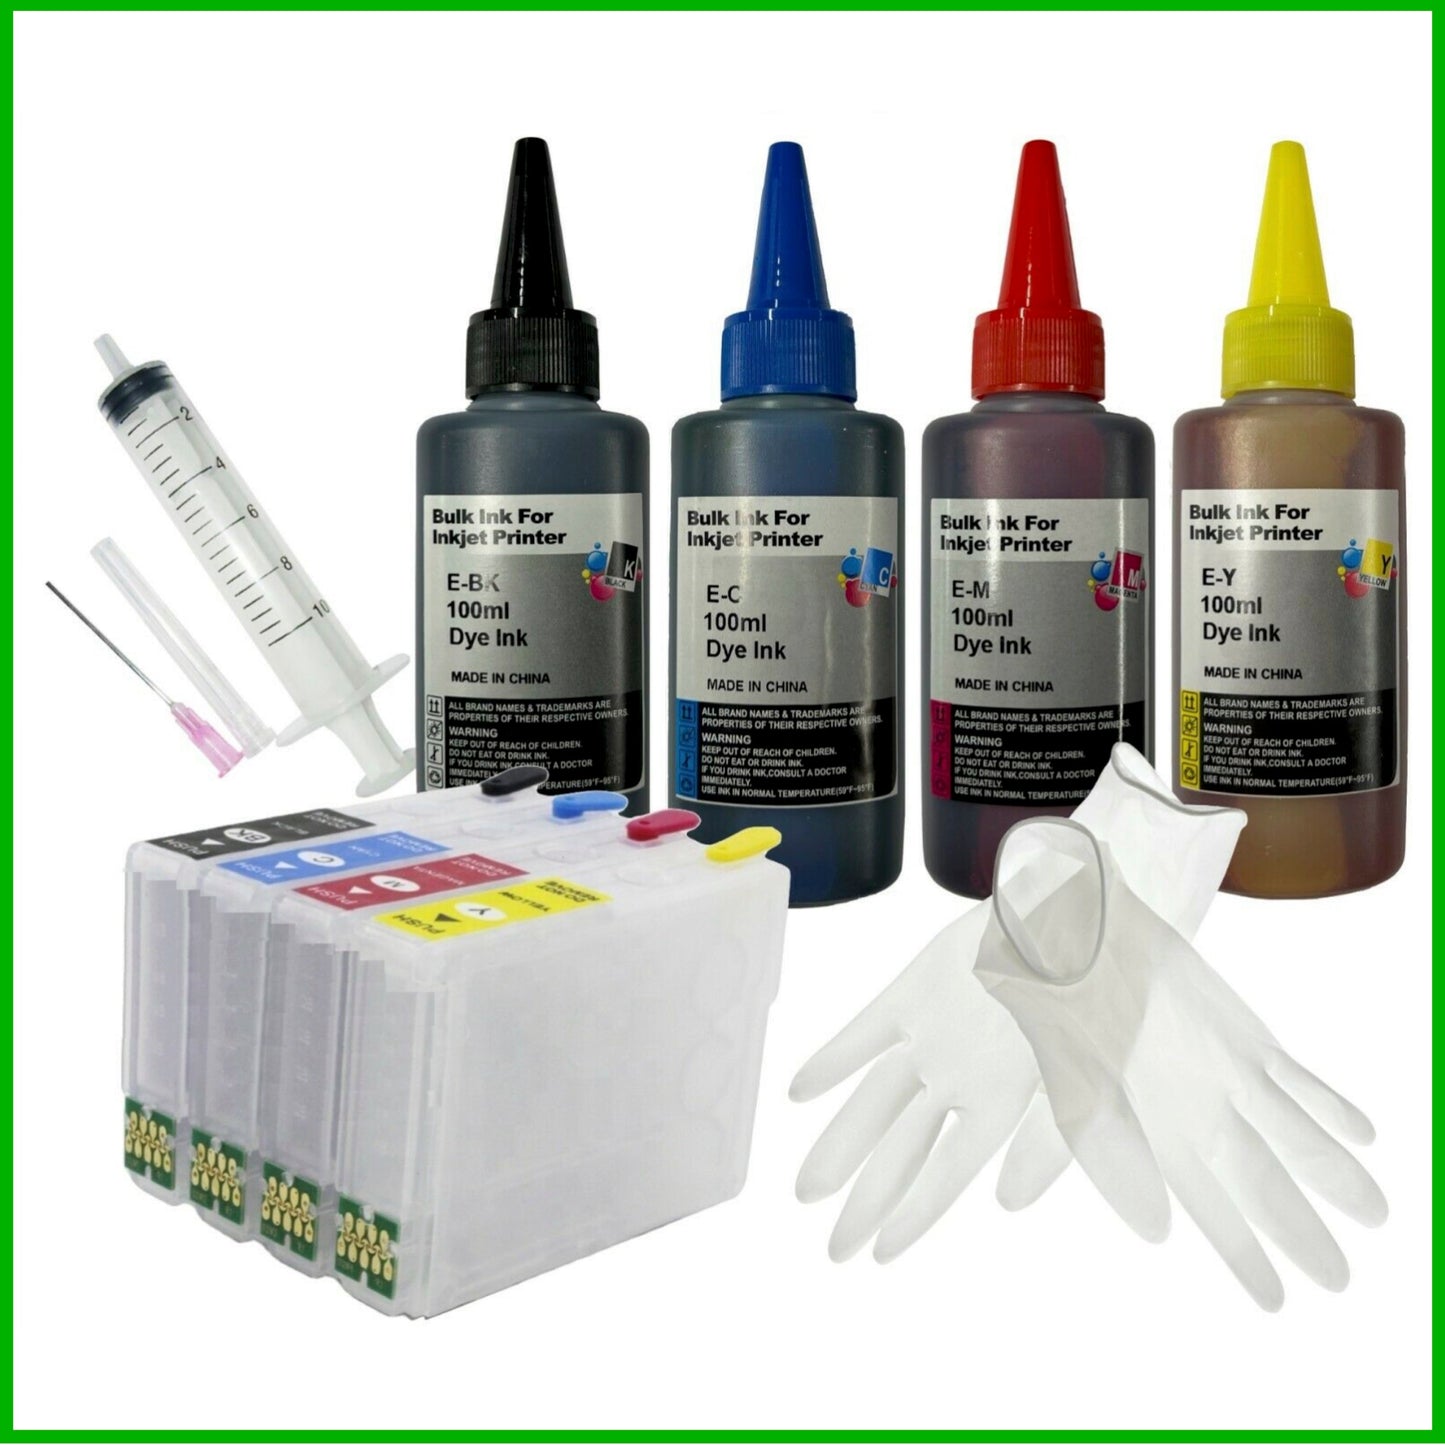 Refill Starter Kit - 715 Cartridges with ARC Chip & Ink for Epson Stylus